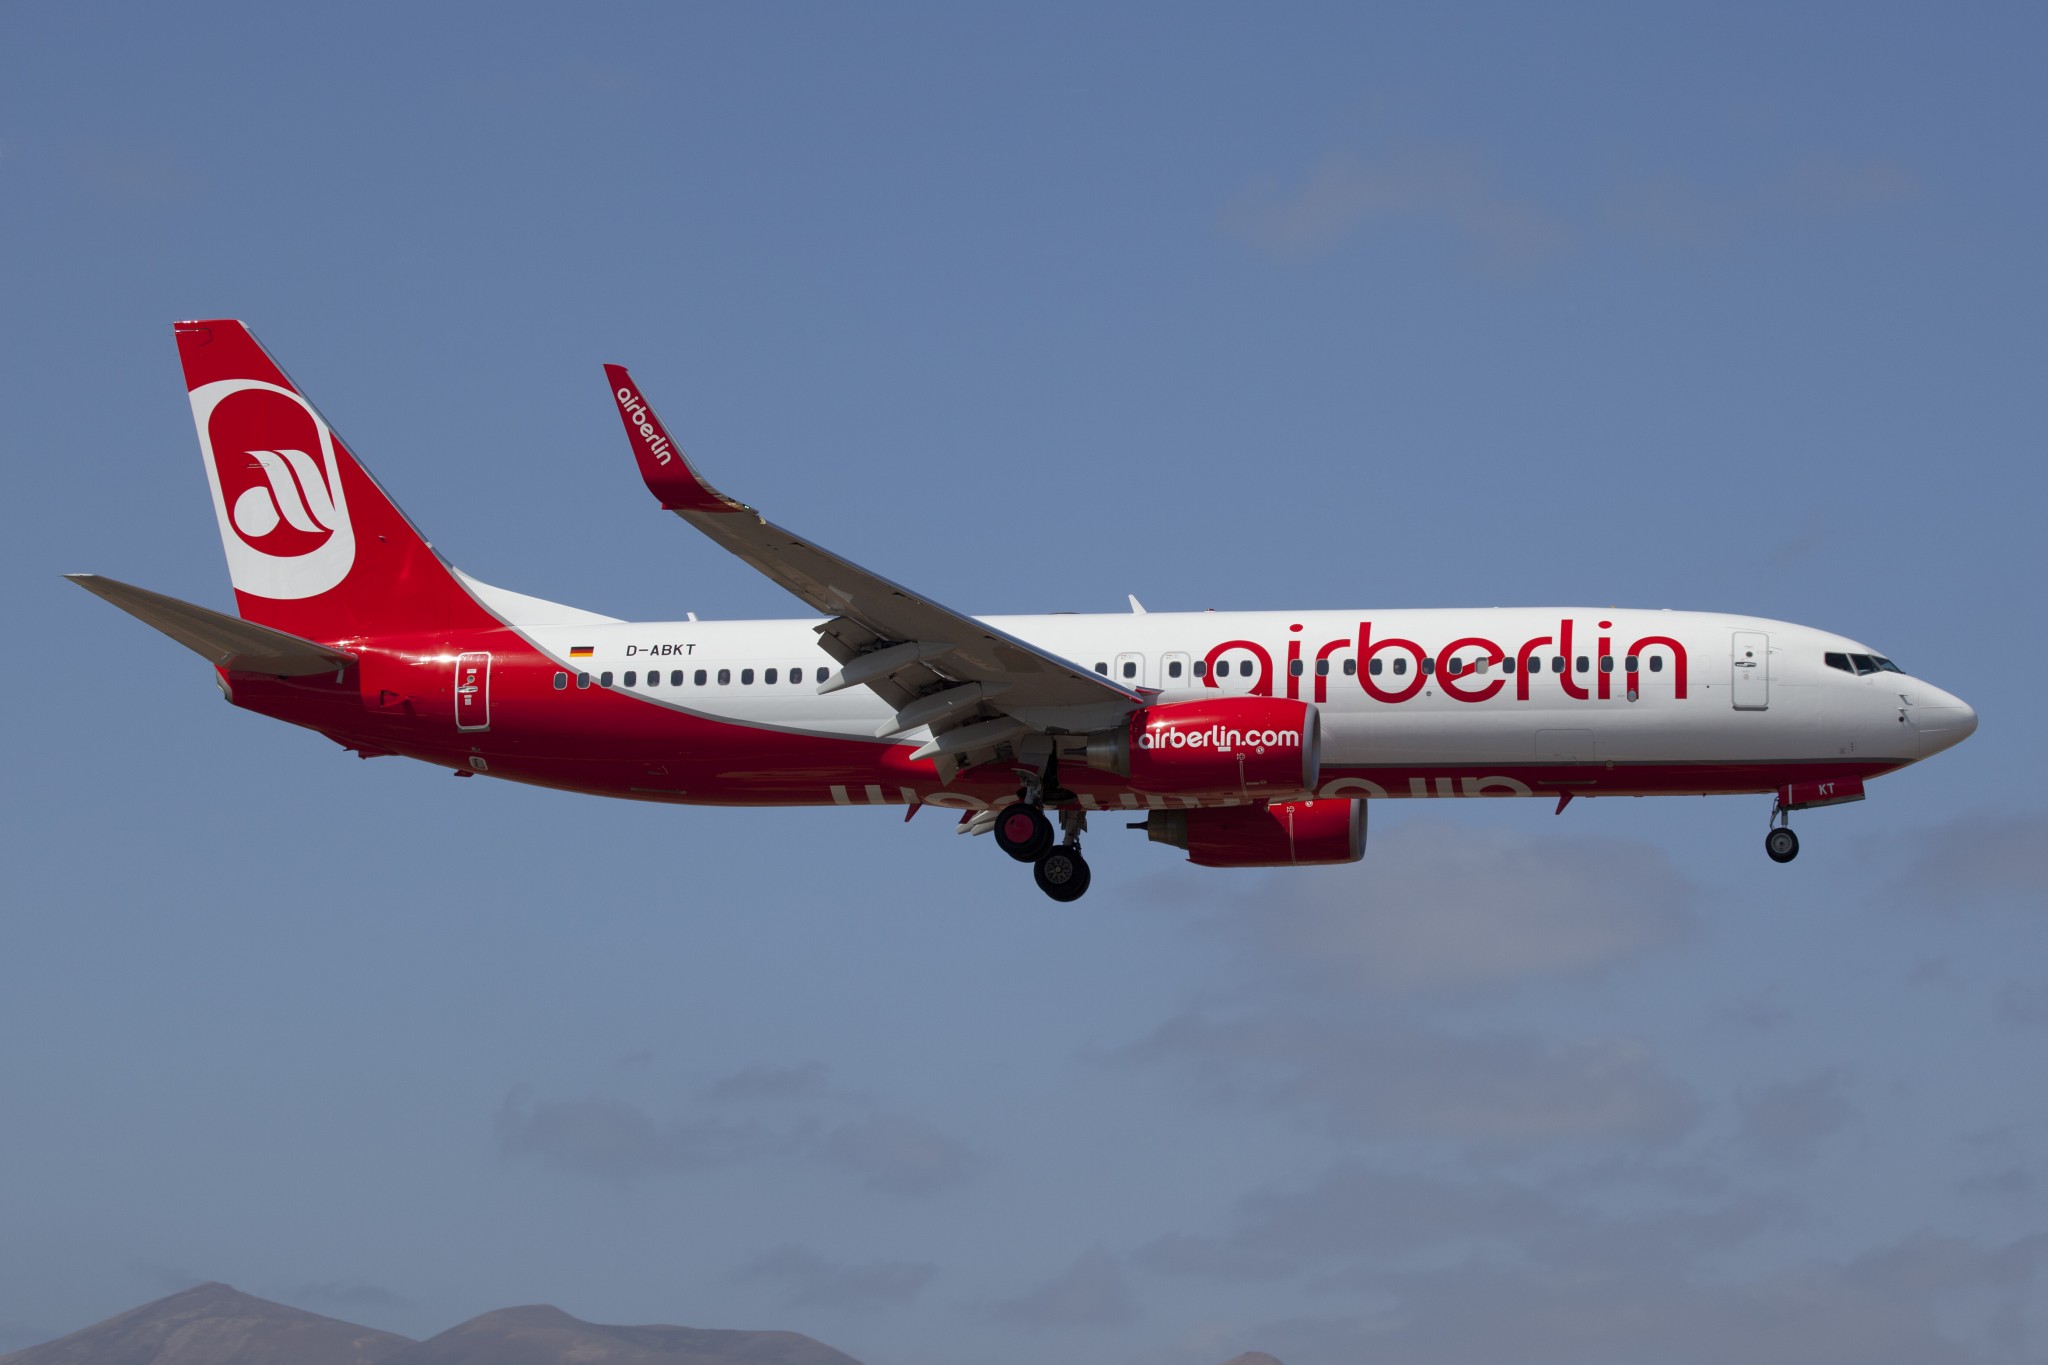 Sundair owner purchases trademark rights of Air Berlin